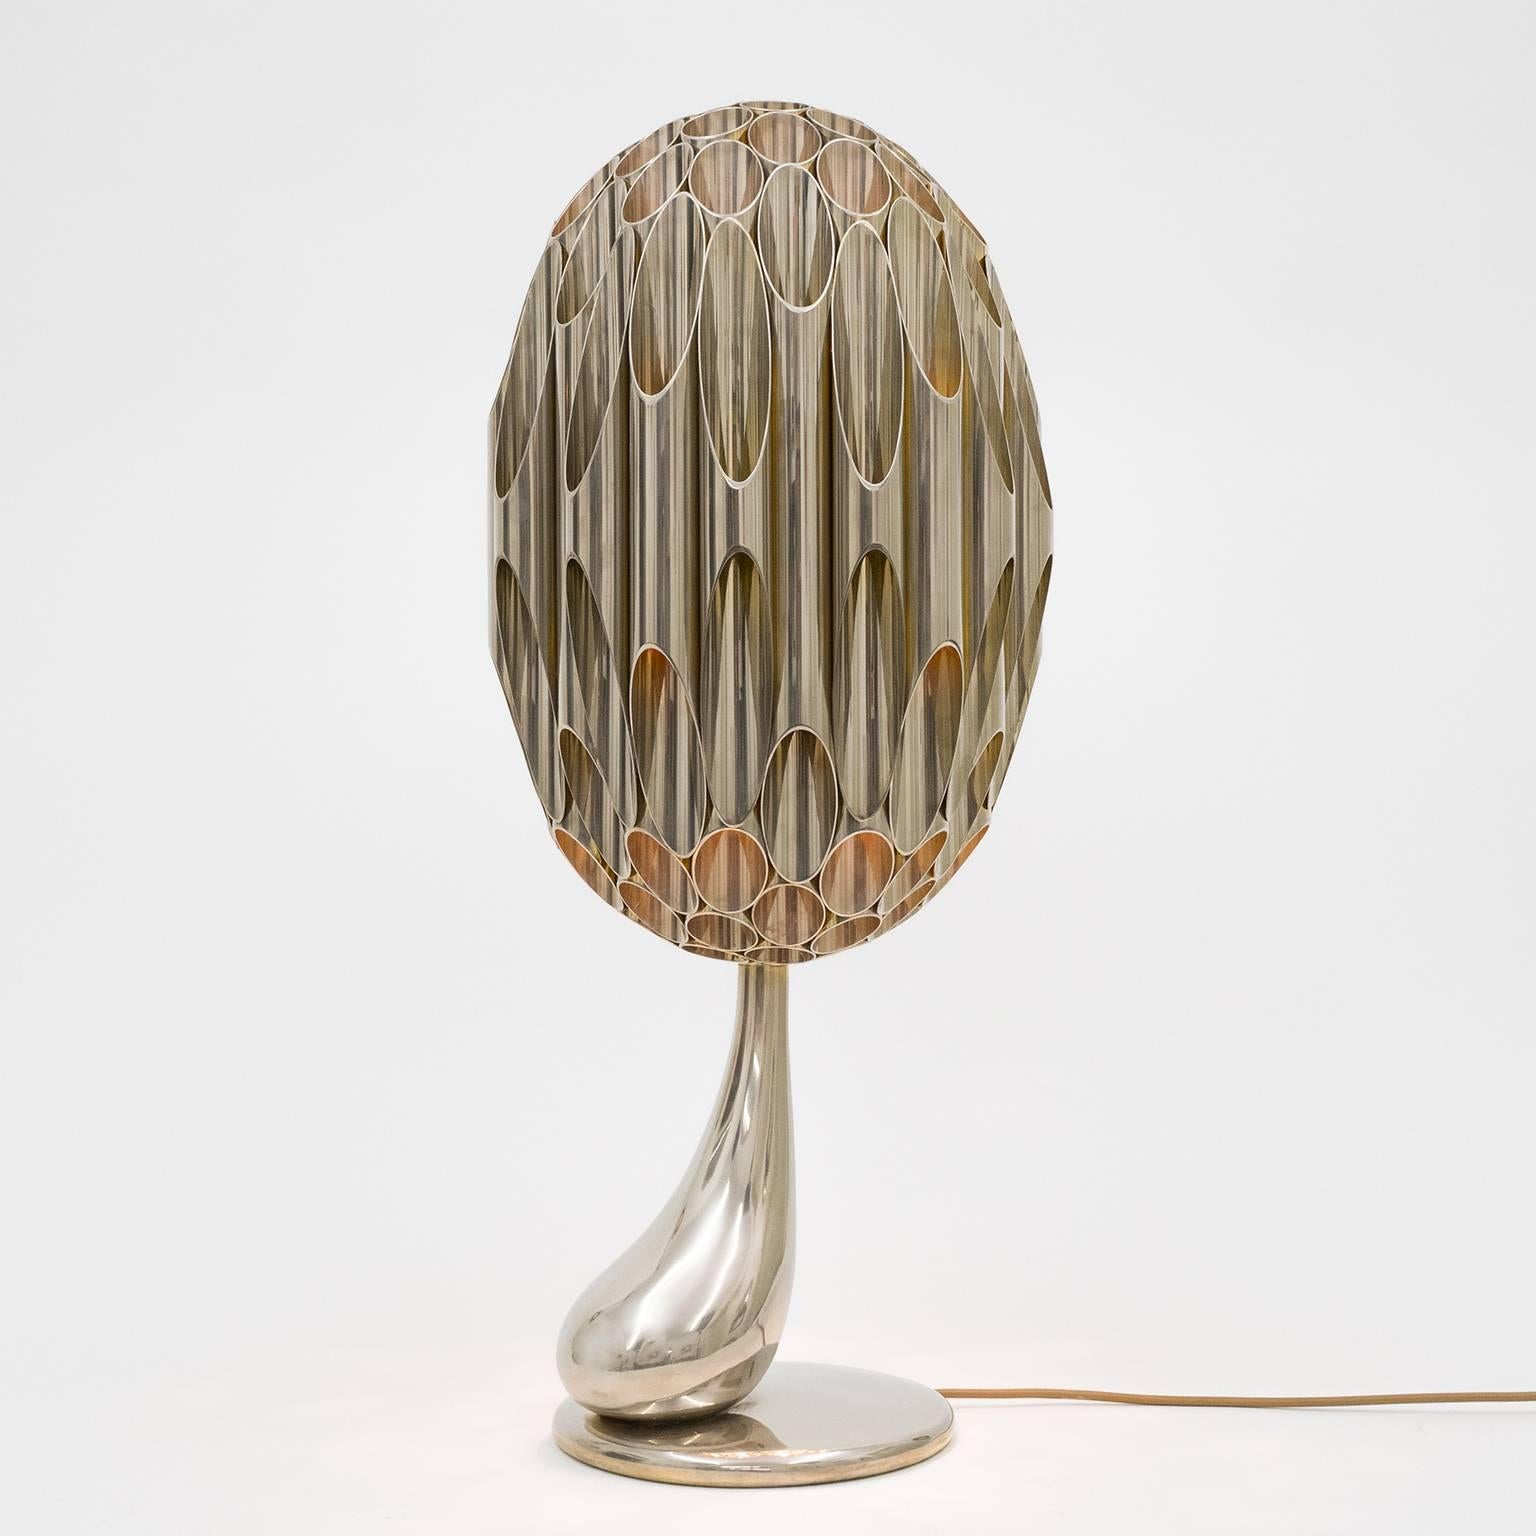 Spectacular Maison Charles table lamp dubbed 'Morille' from the 1970s. Atop the solid cast base and stem sits an intricate tubular structure in the shape of a stylized morel. The entire lamp is nickeled on the outside and gilt on the inside thus